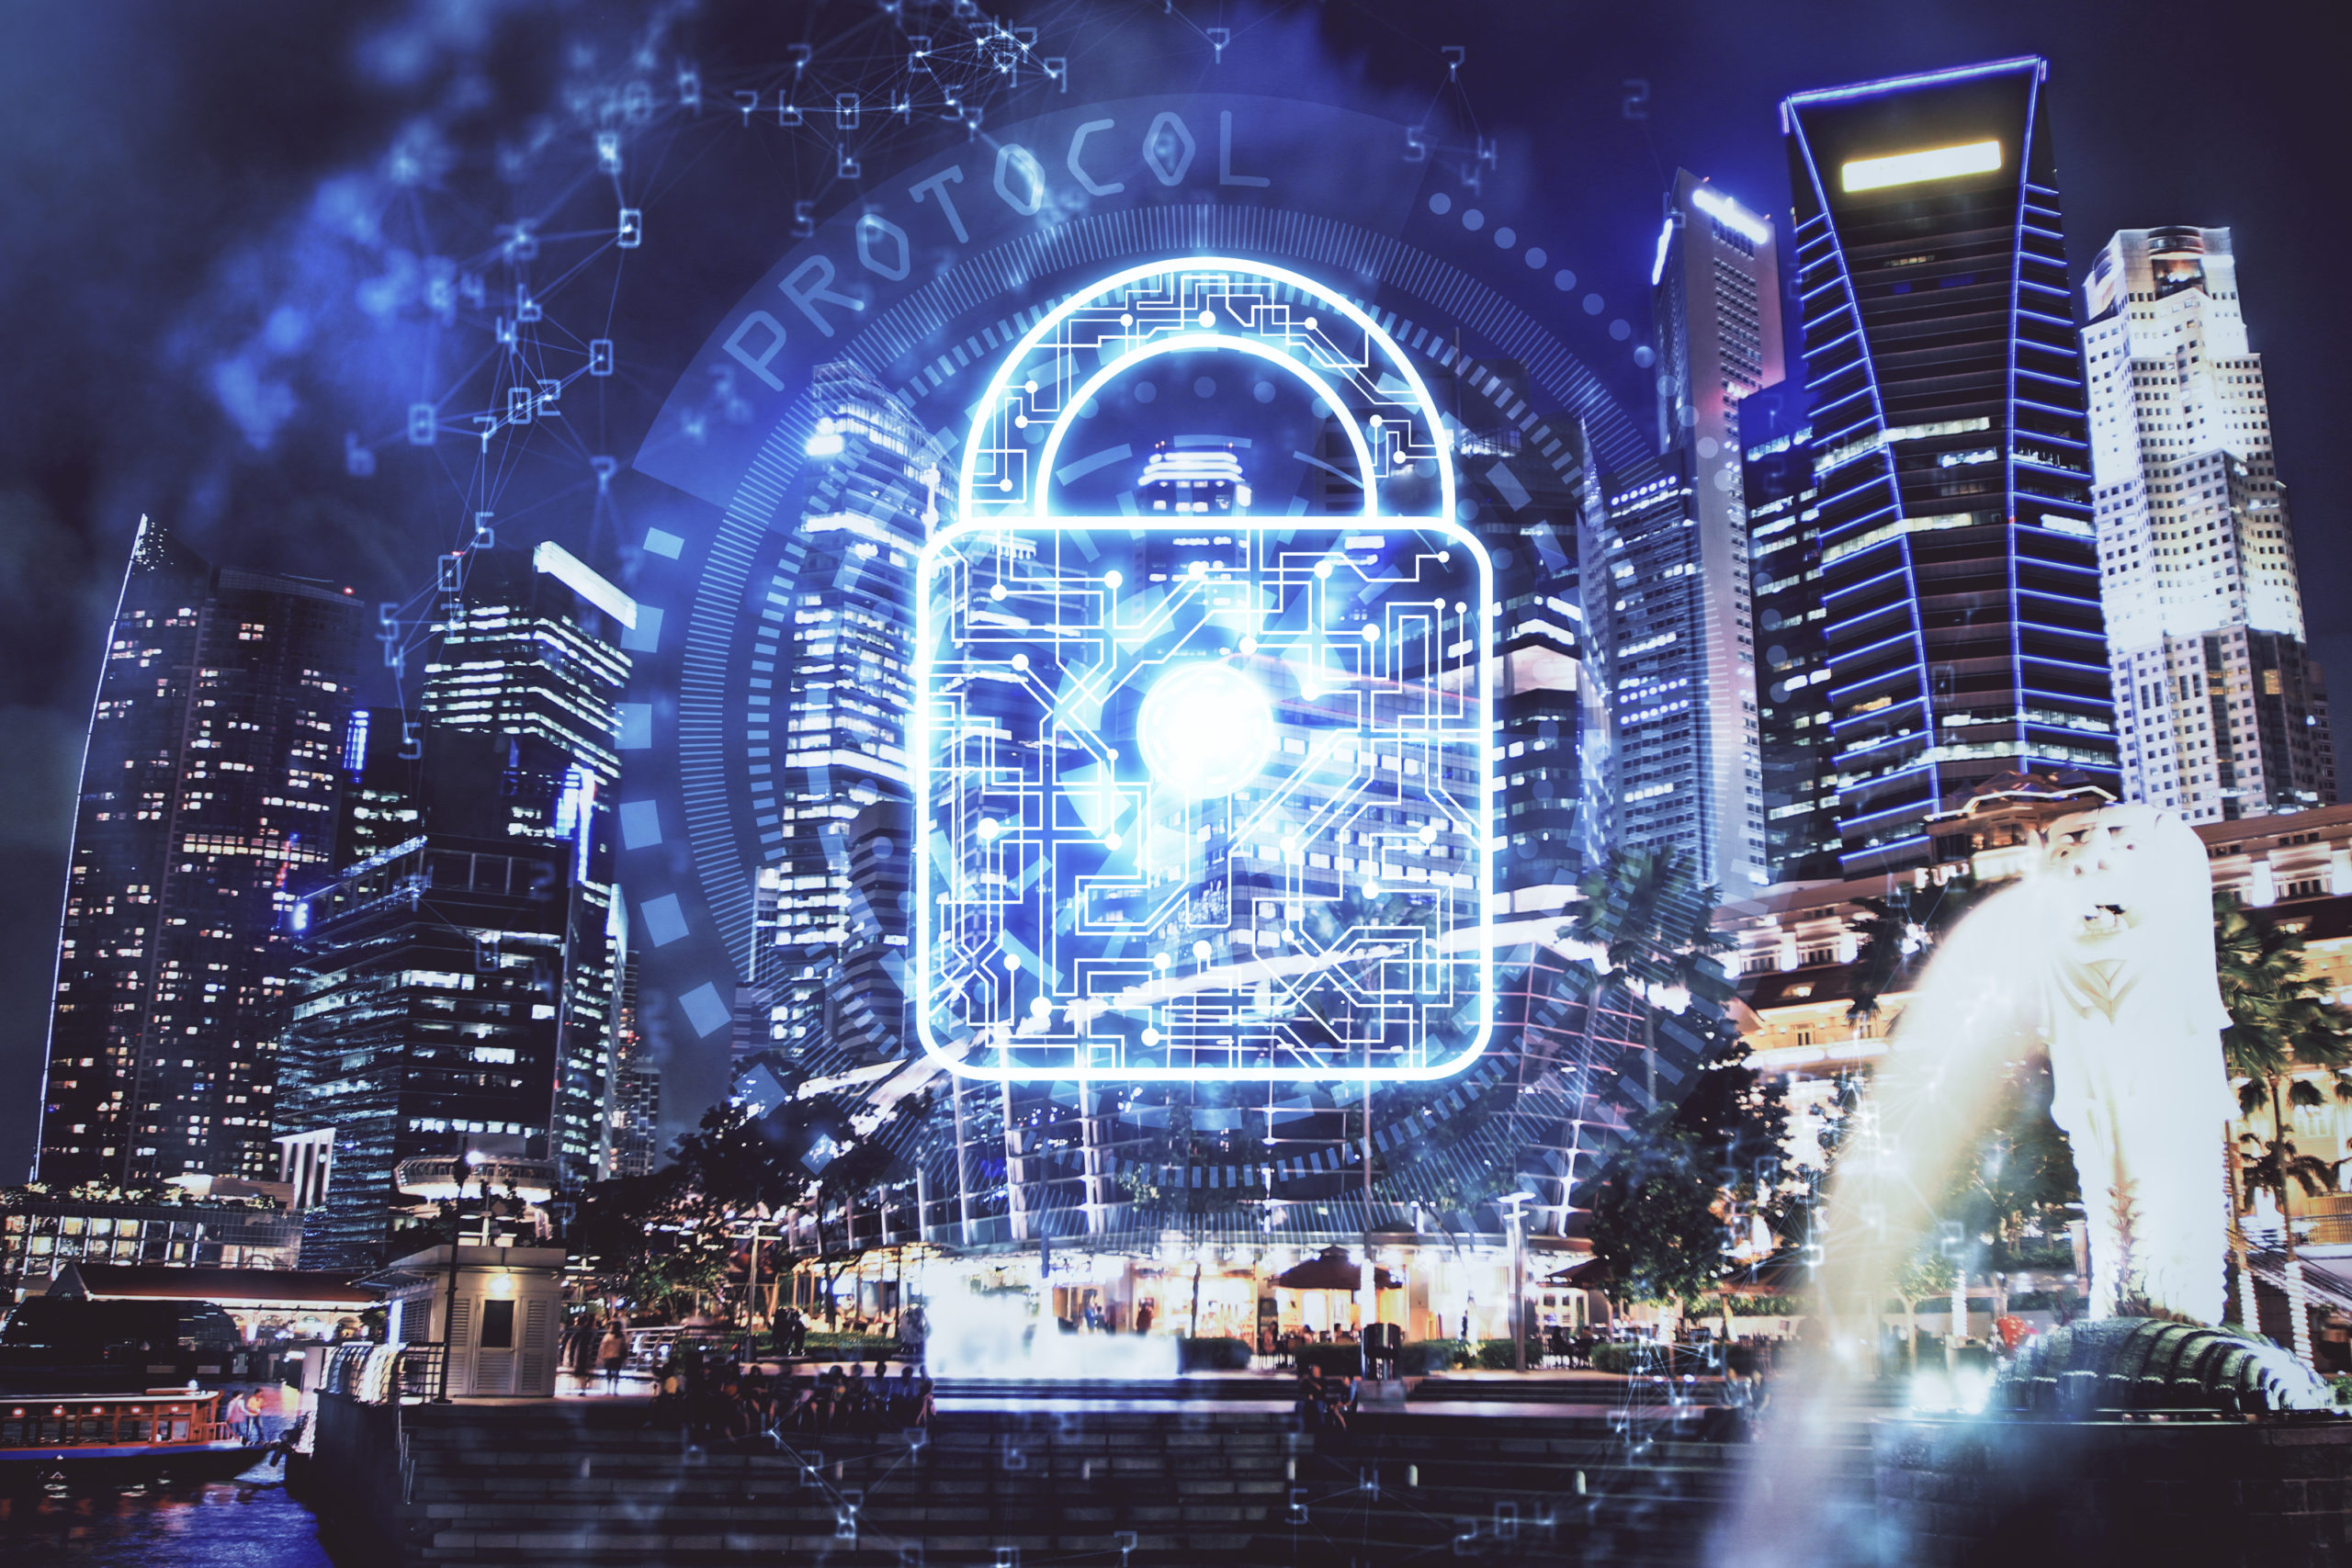 Lock Icon Hologram On City View With Skyscrapers Background Multi Exposure Data Security Concept 